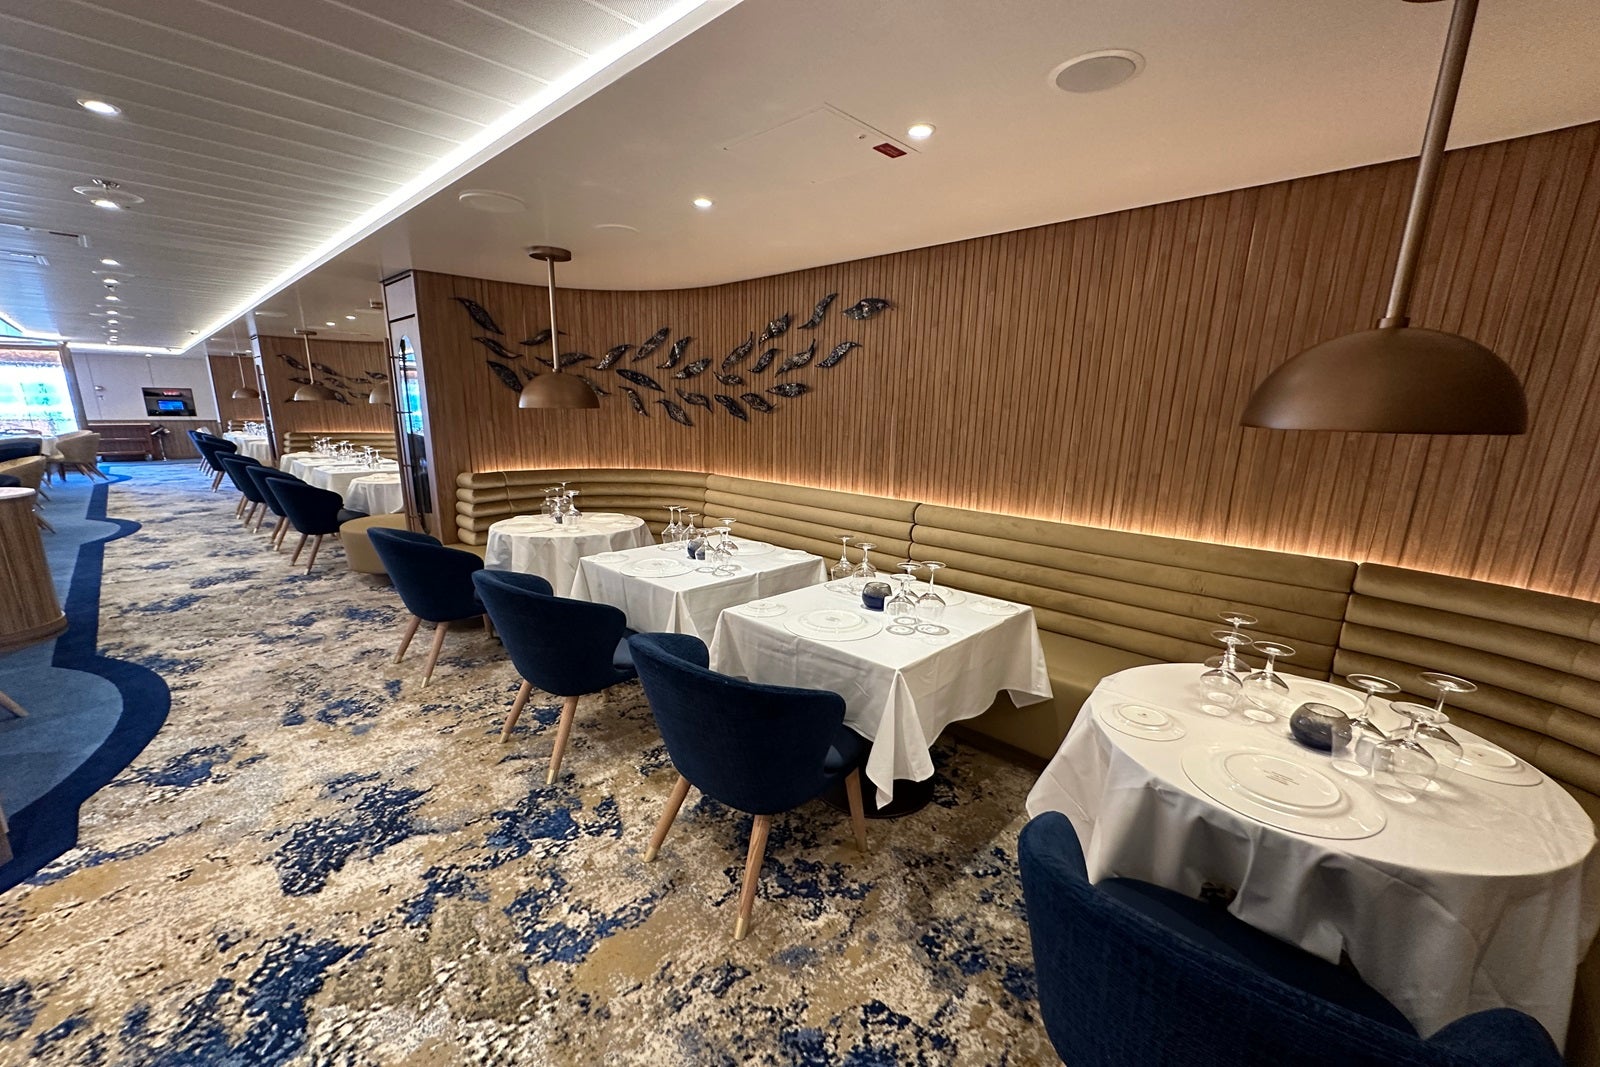 A restaurant with tan and blue carpeting, tables with white tablecloths, blue chairs and a curved, wooden wall with fish designs